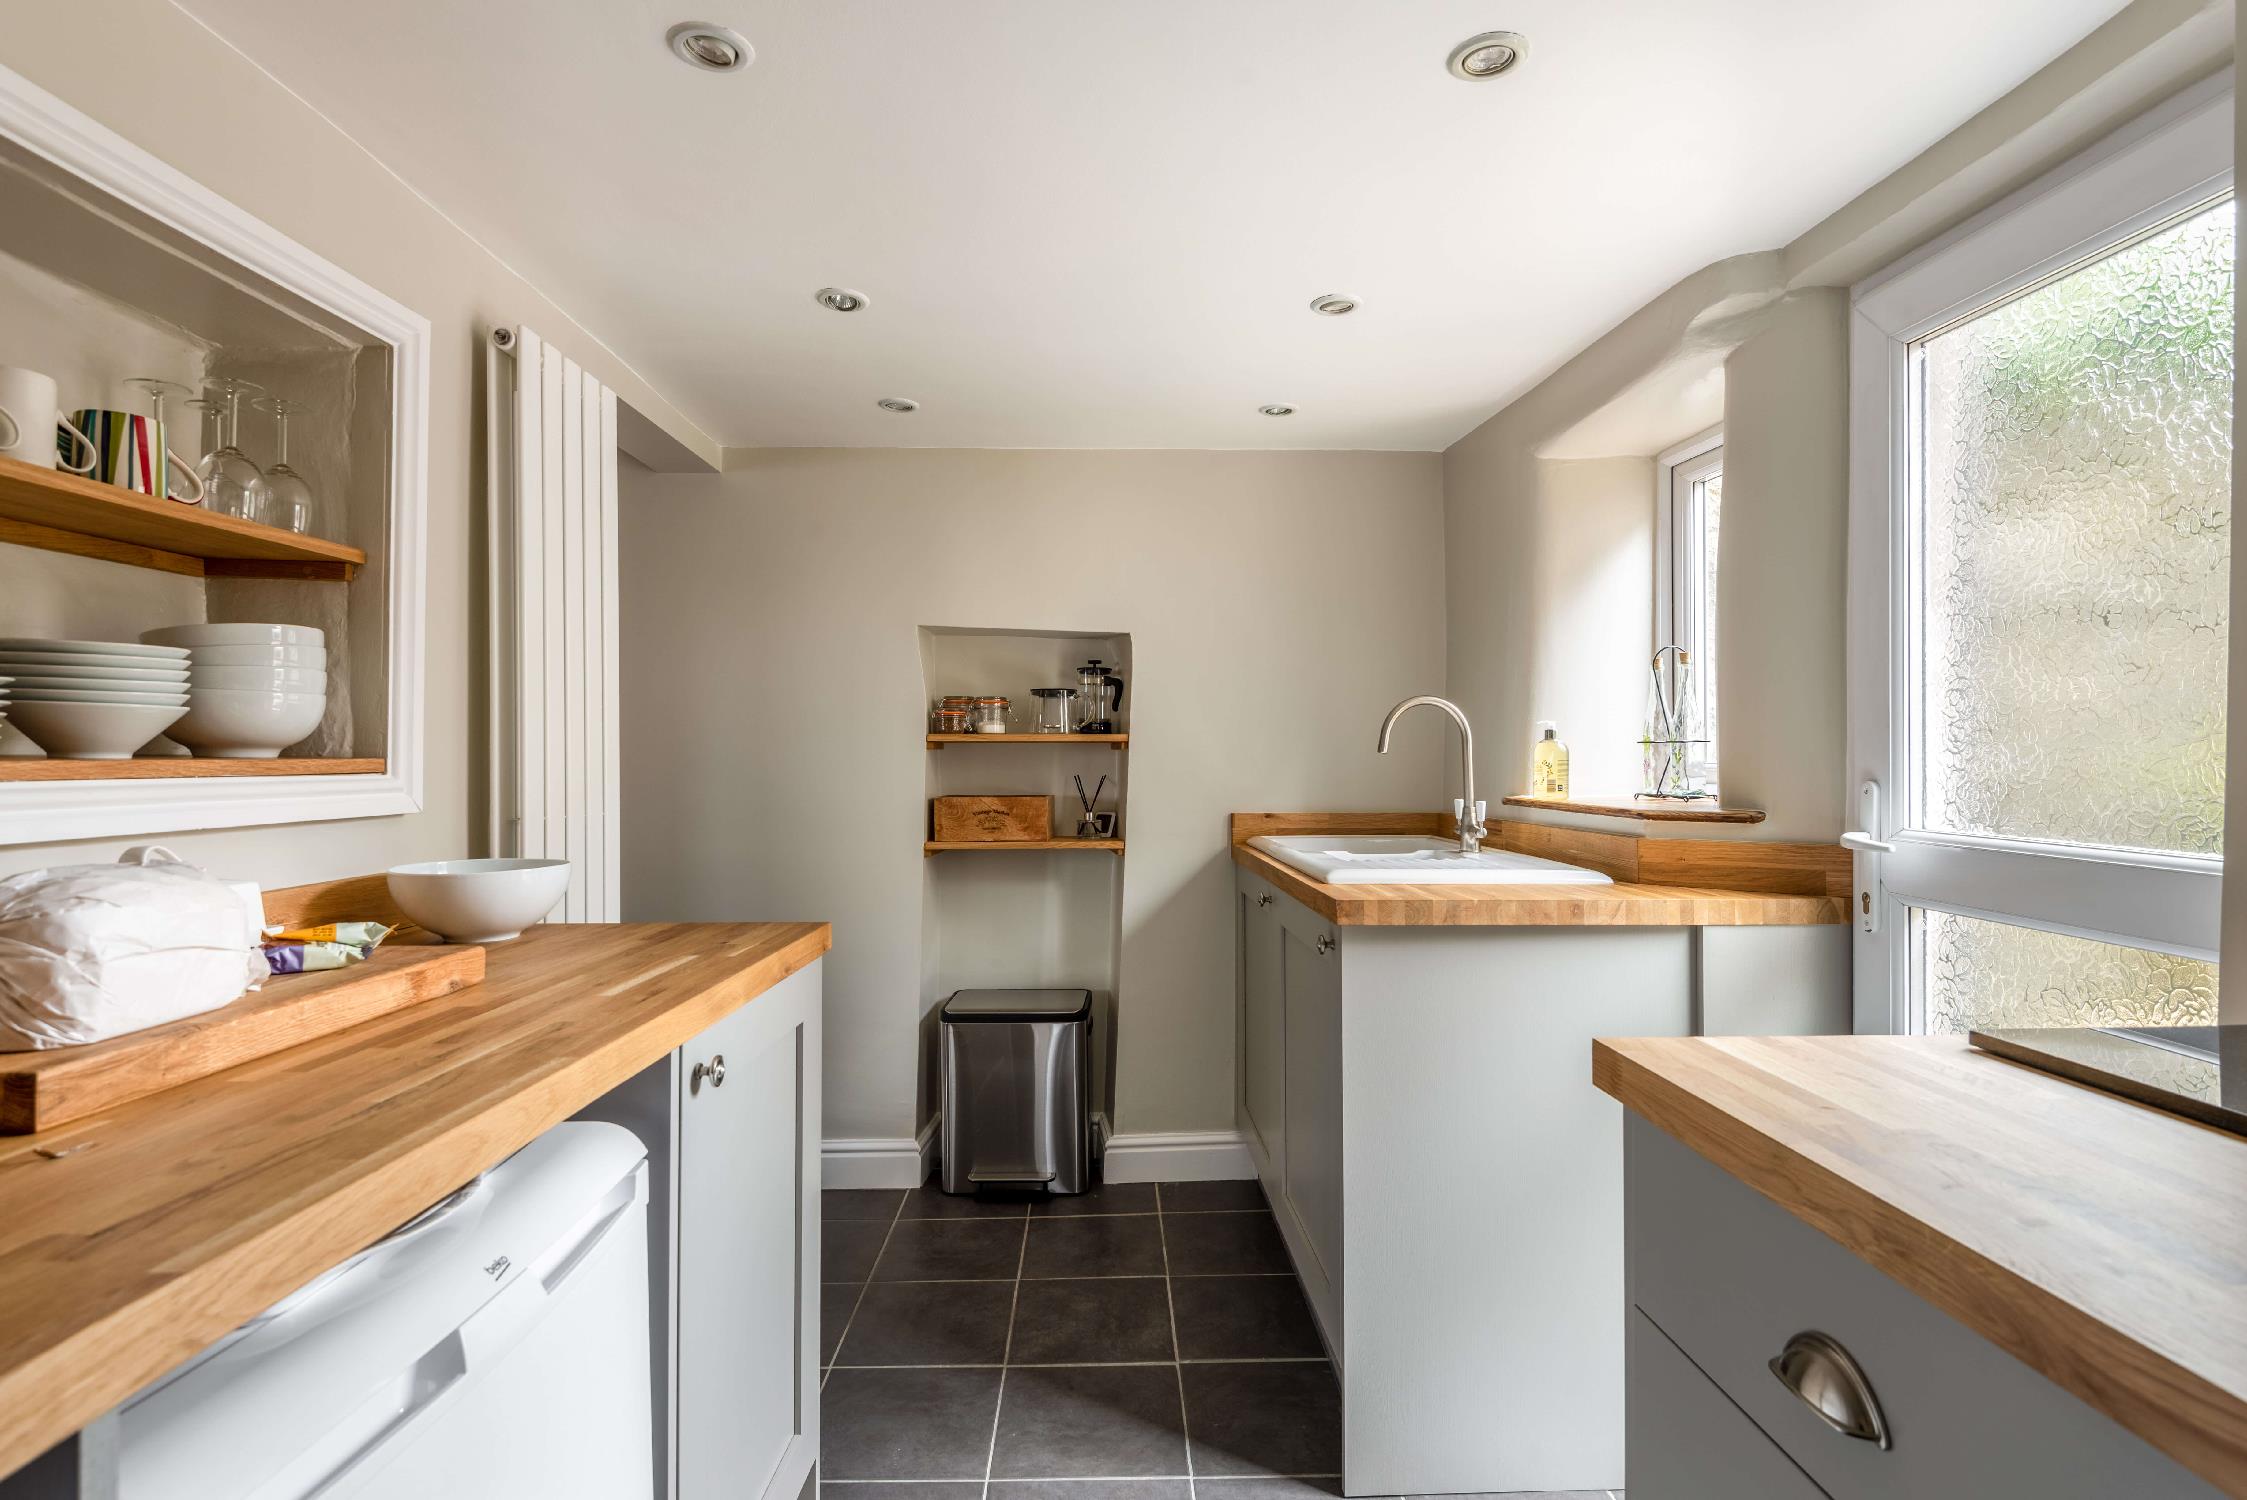 Eight The Green has a new kitchen with oak worktops